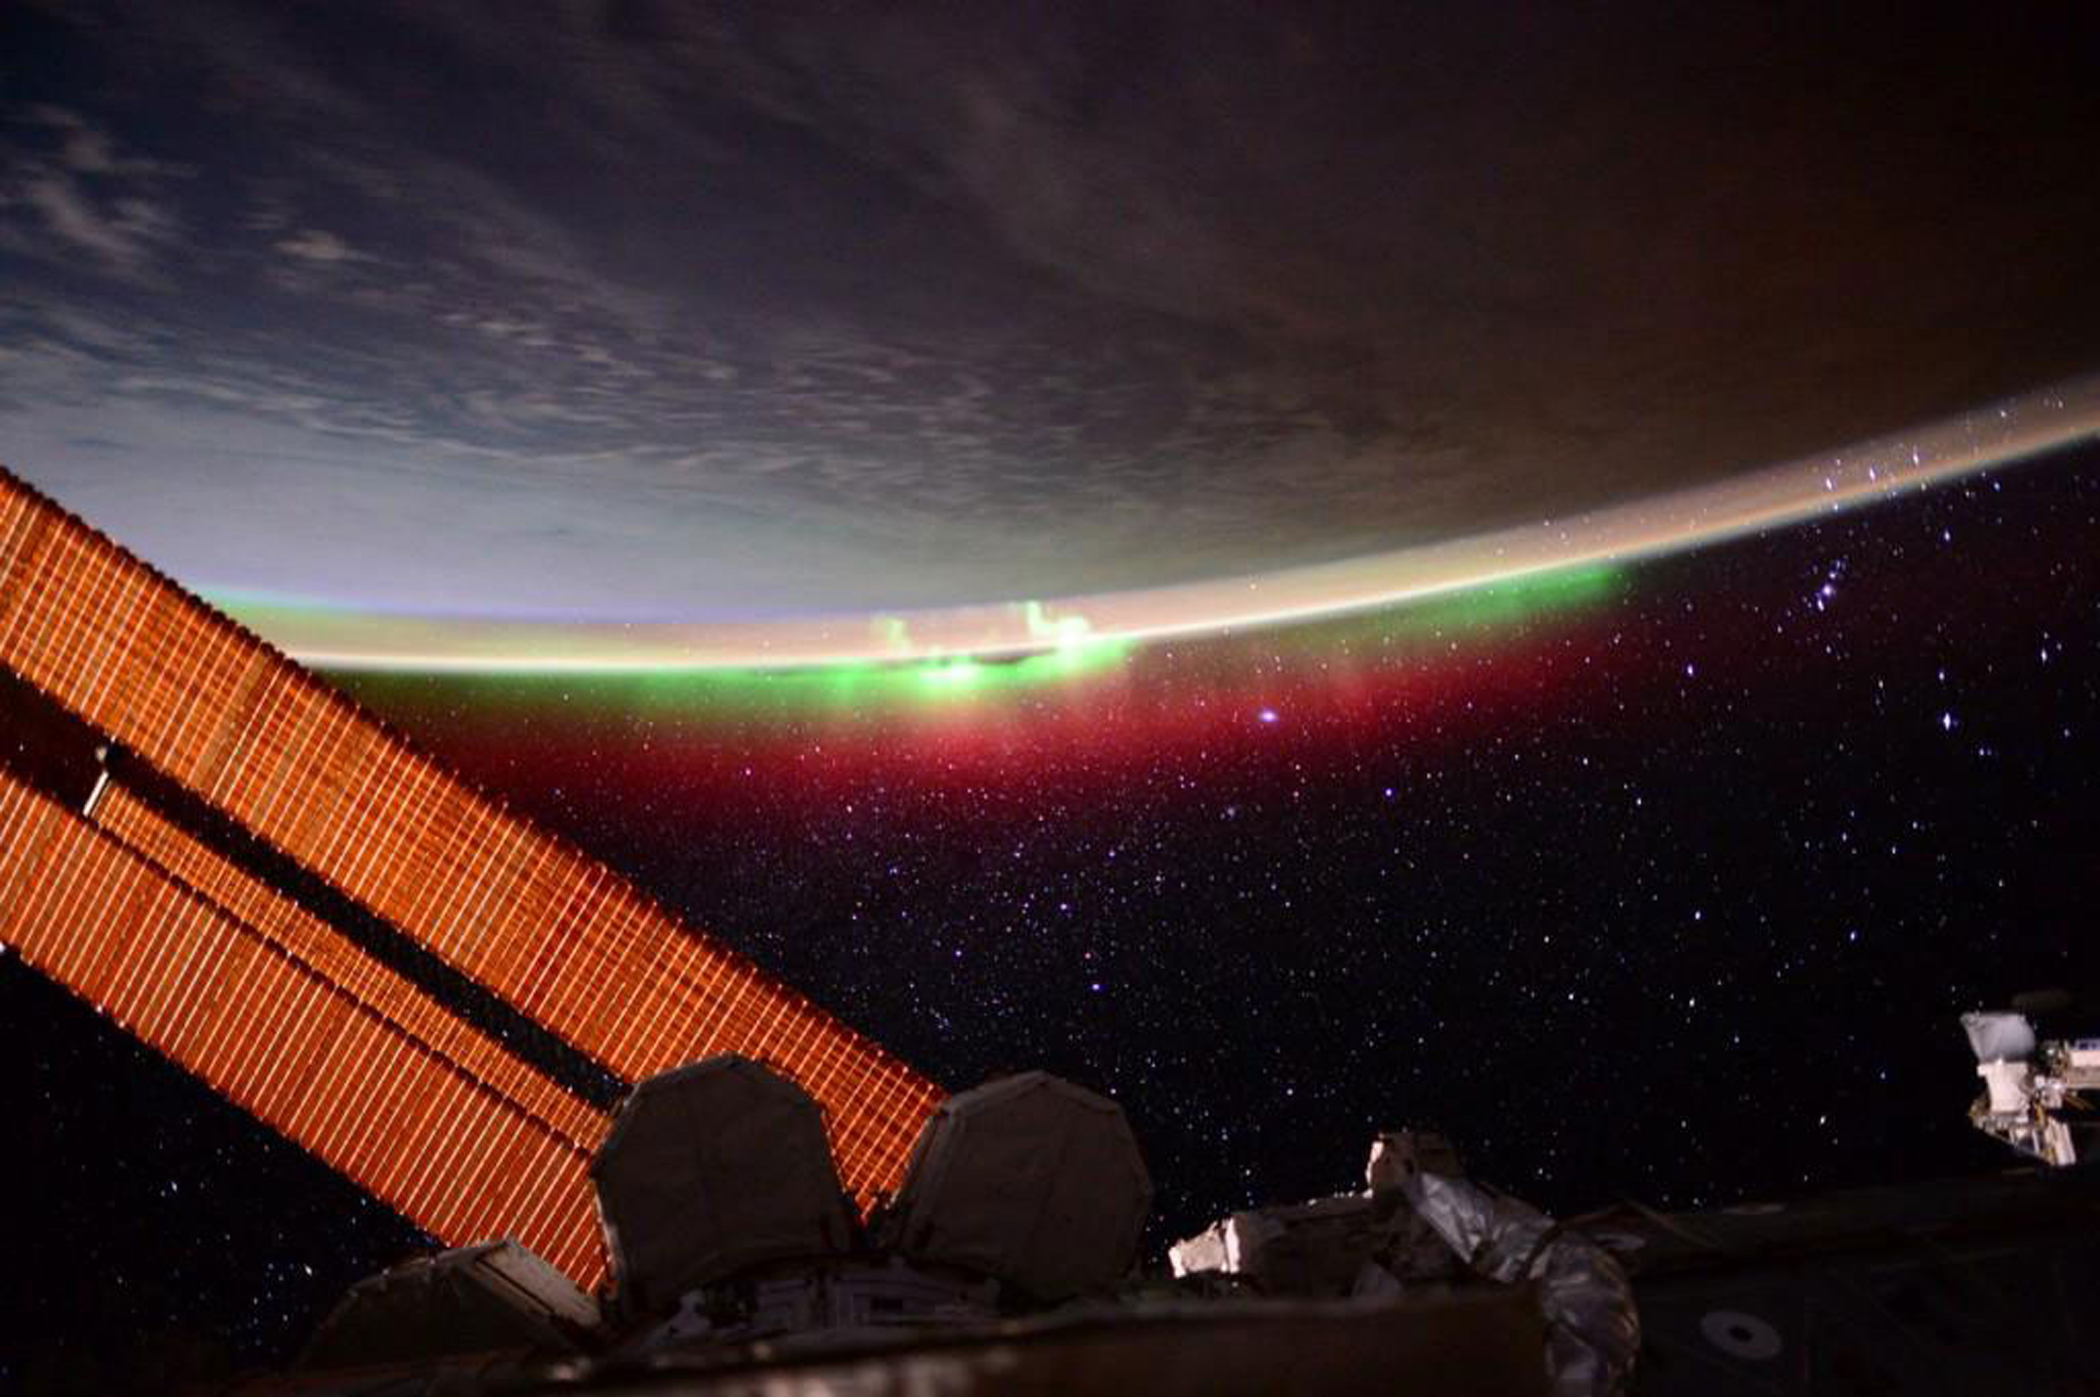 A brilliant aurora as seen from the International Space Station on June 27, 2015.